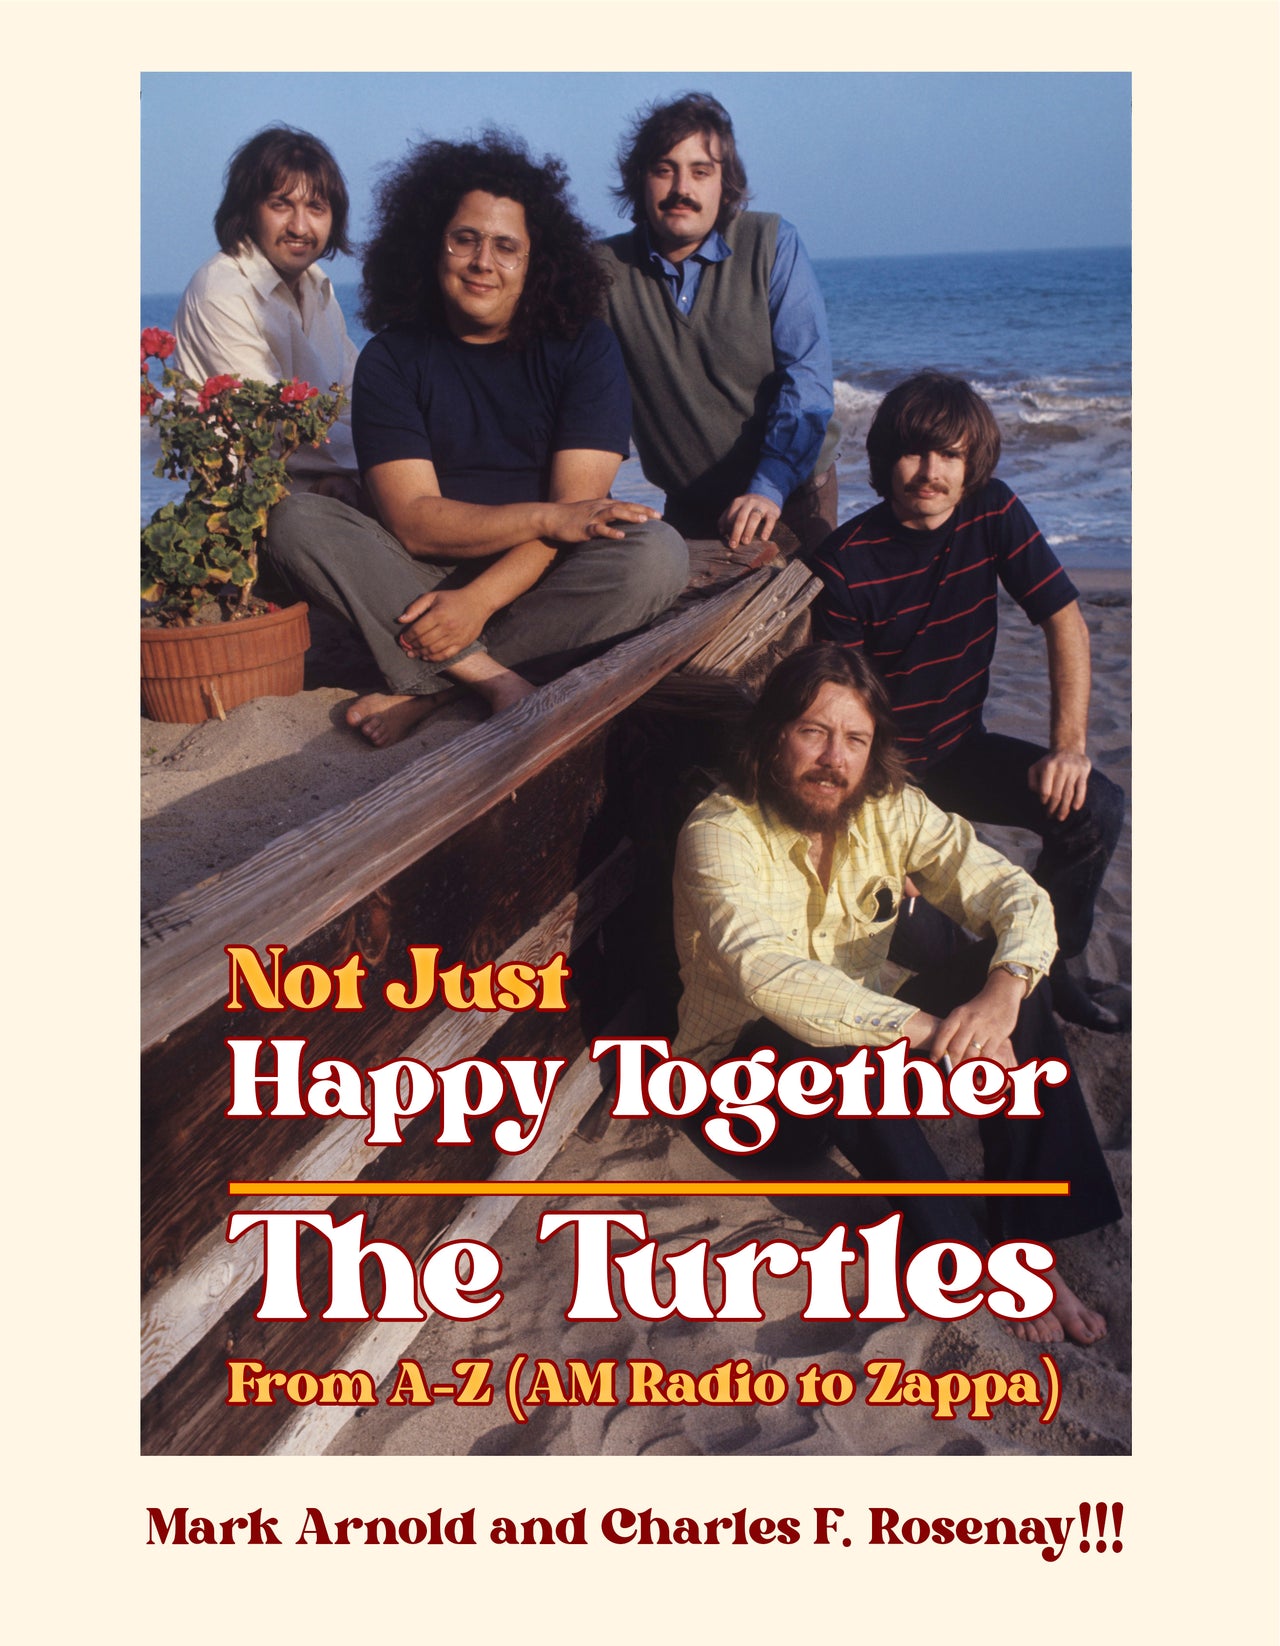 Not Just Happy Together: The Turtles from A-Z (AM Radio to Zappa)